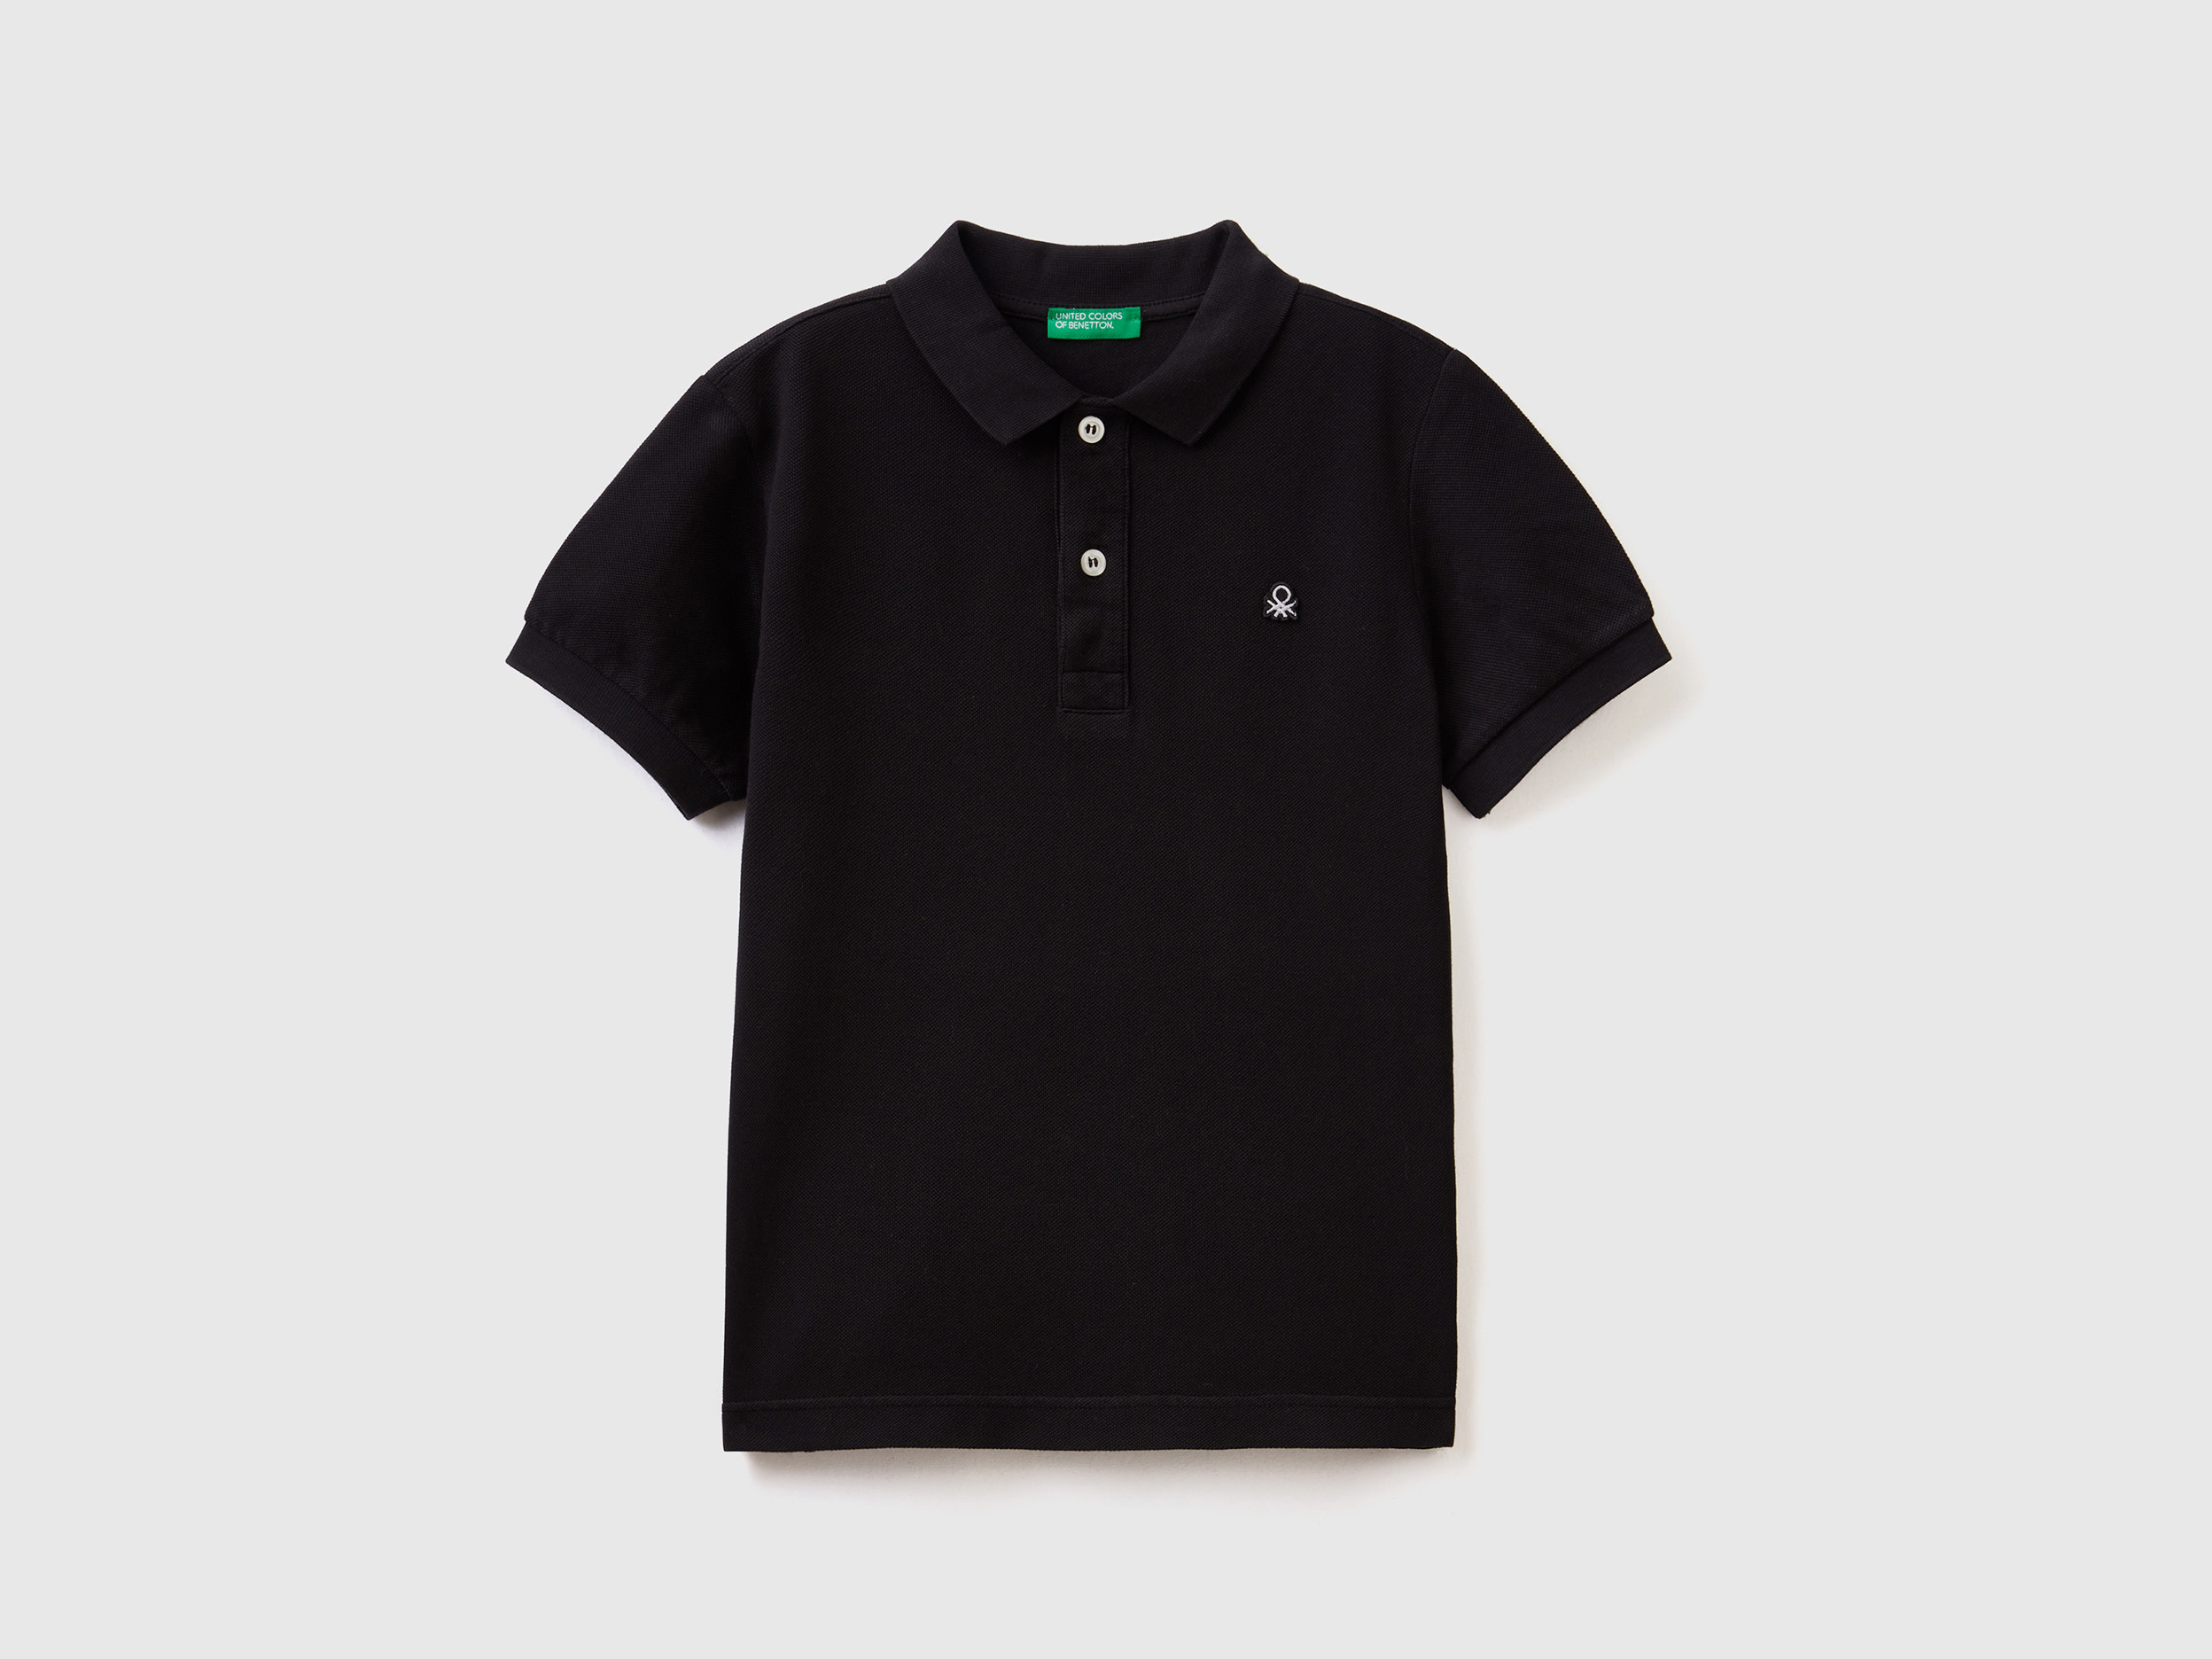 Image of Benetton, Slim Fit Polo In 100% Organic Cotton, size XL, Black, Kids